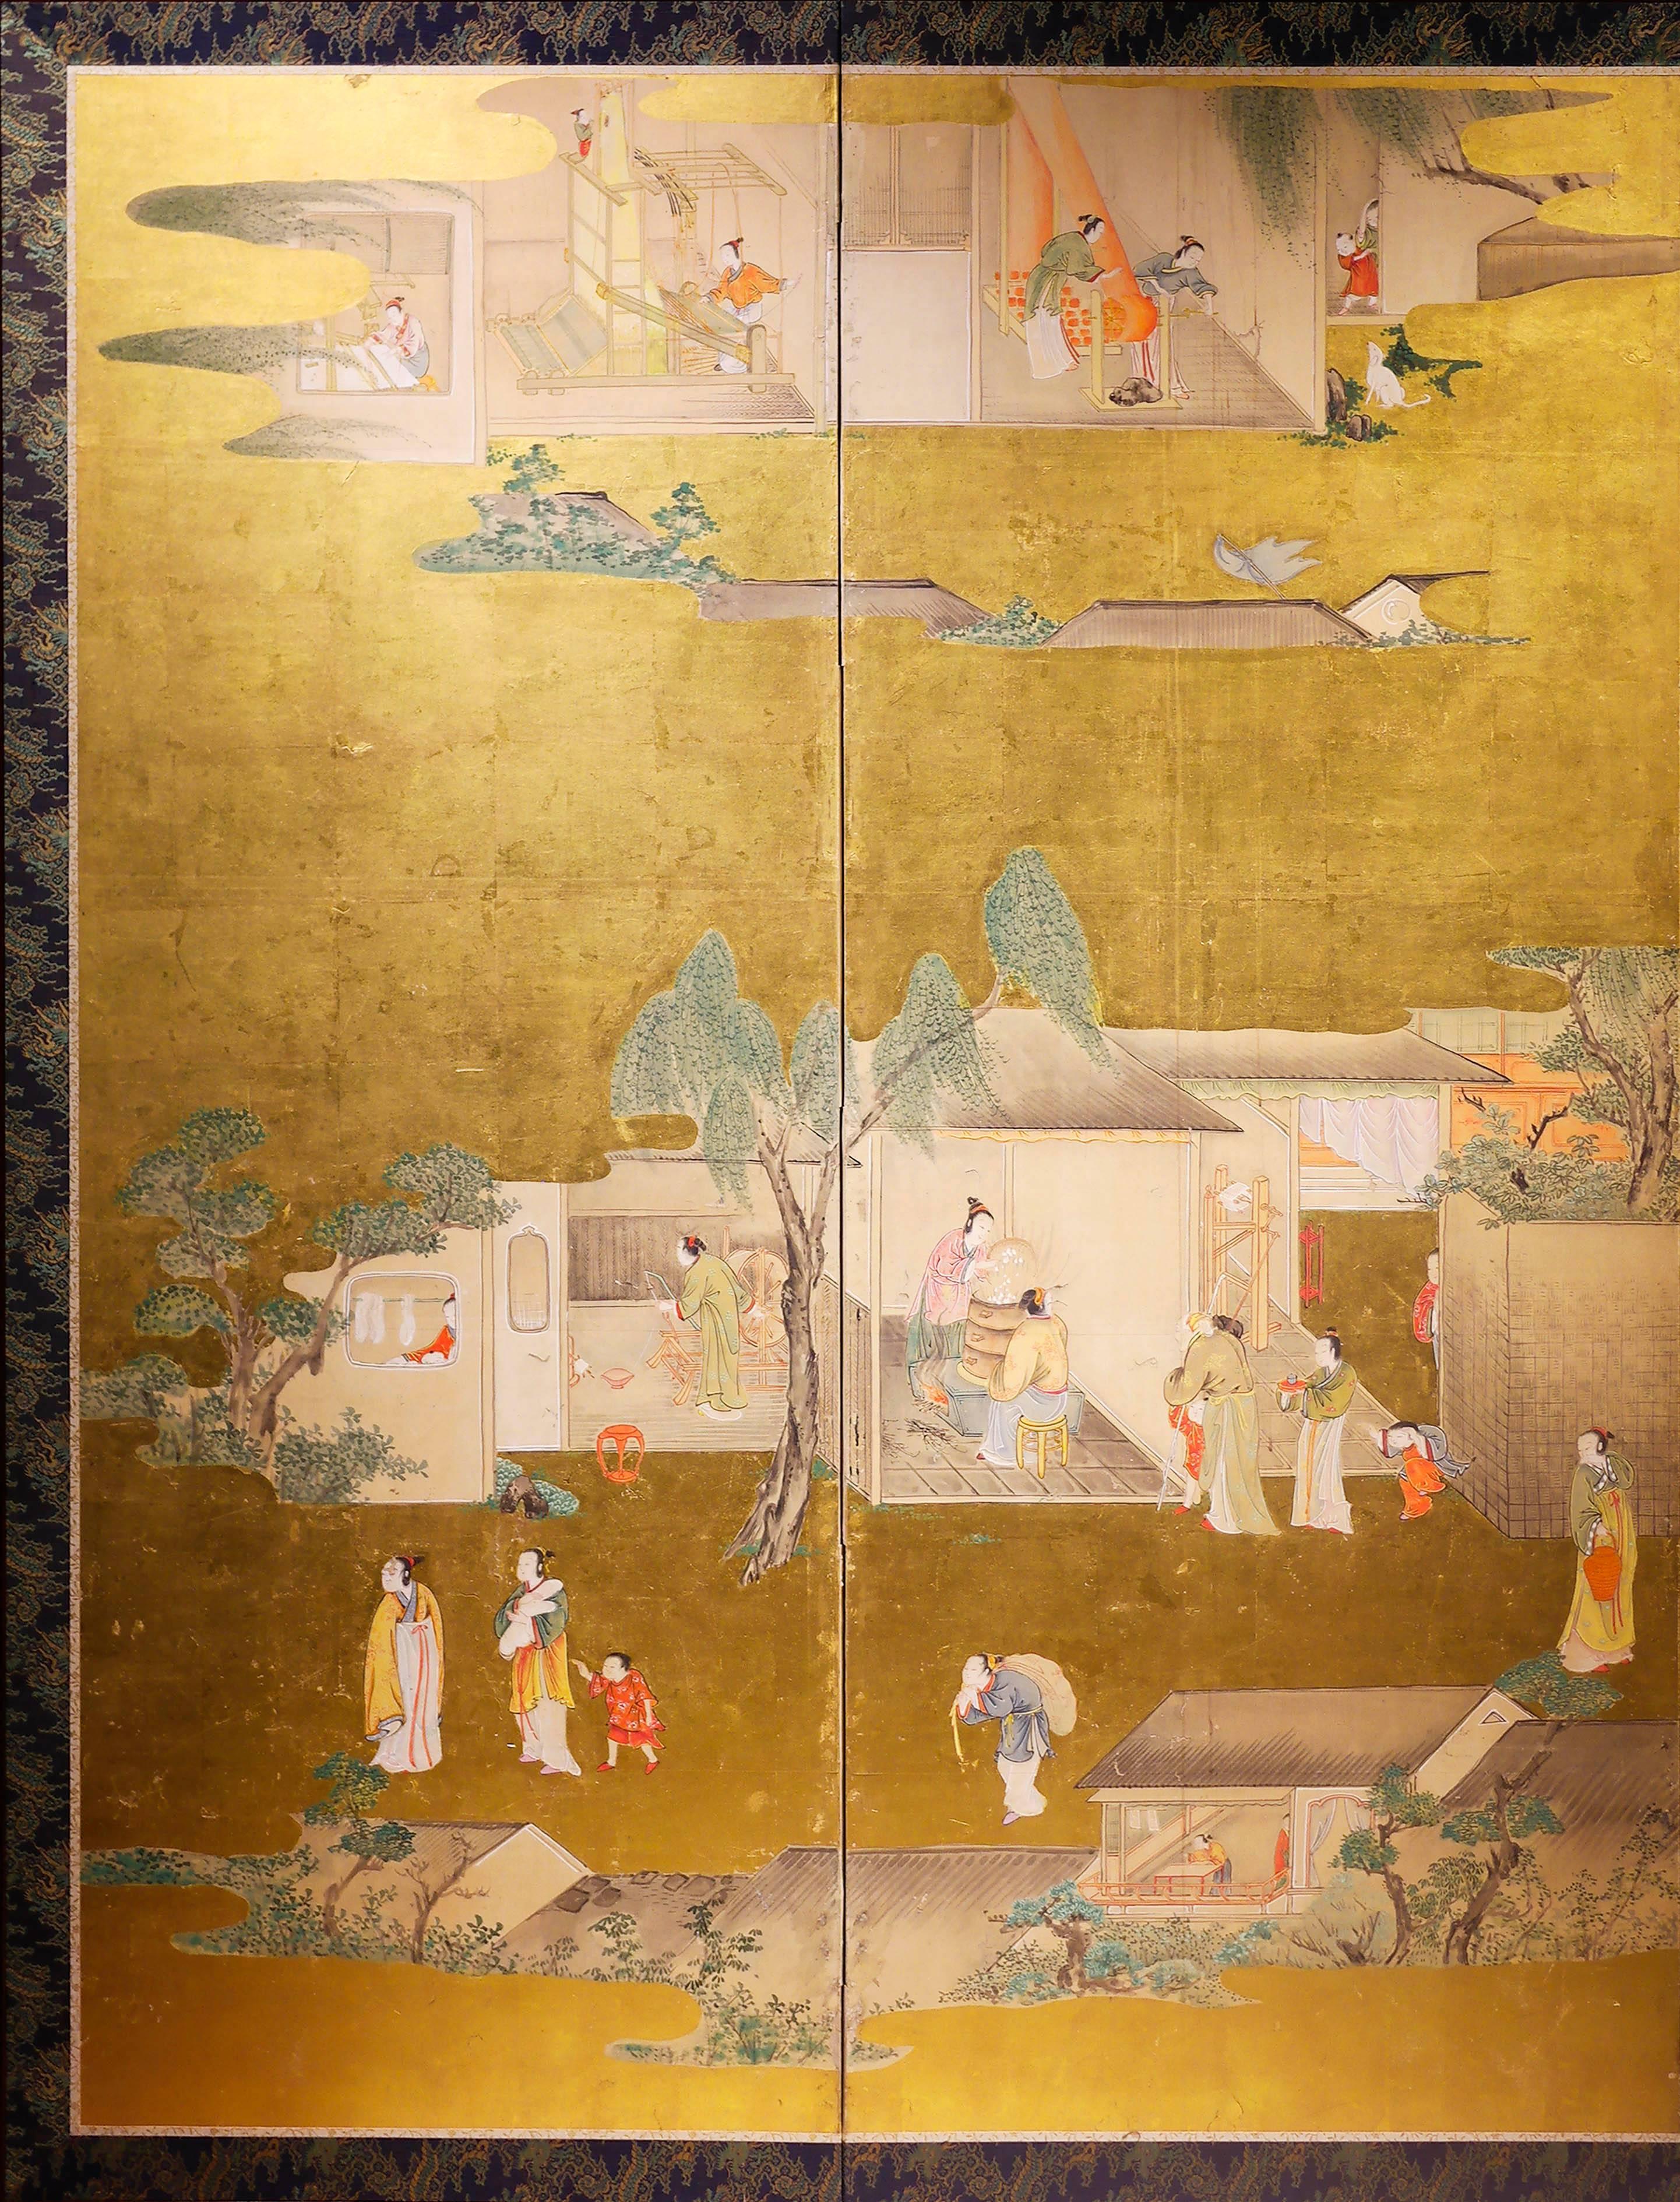 Pictures of agriculture and sericulture exemplify a new genre of painting with a focus on the representation of the common people, depicting the customs or behavior. They became the most popular subject for paintings in the Song and Yuan